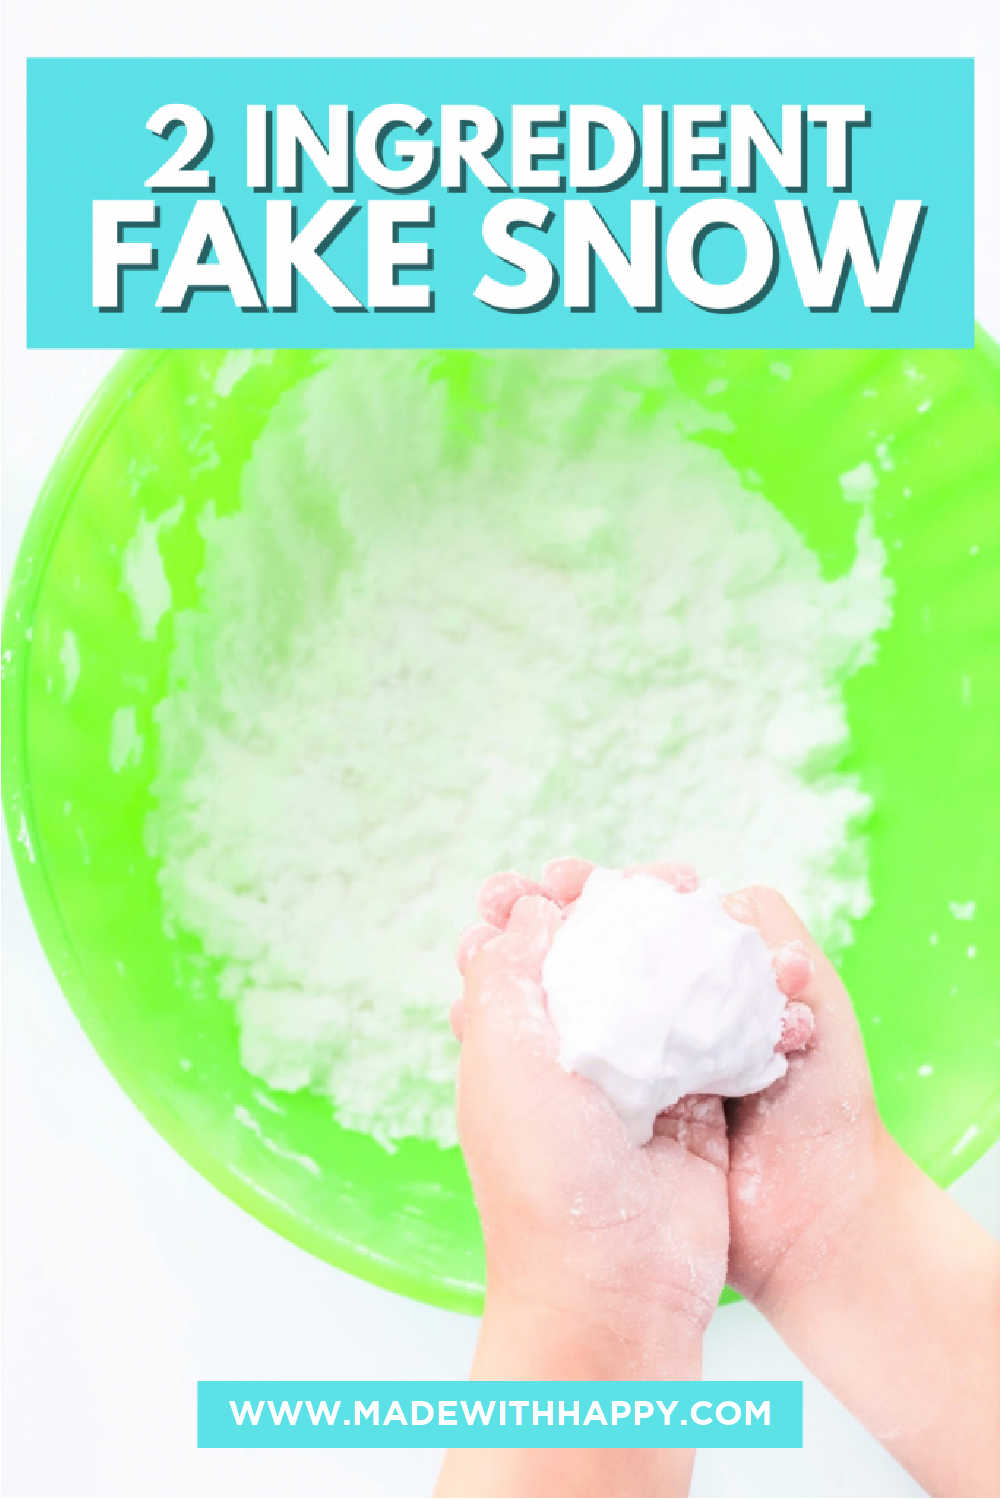 How to Make Snow Paint Using Just Two Ingredients! - Messy Little